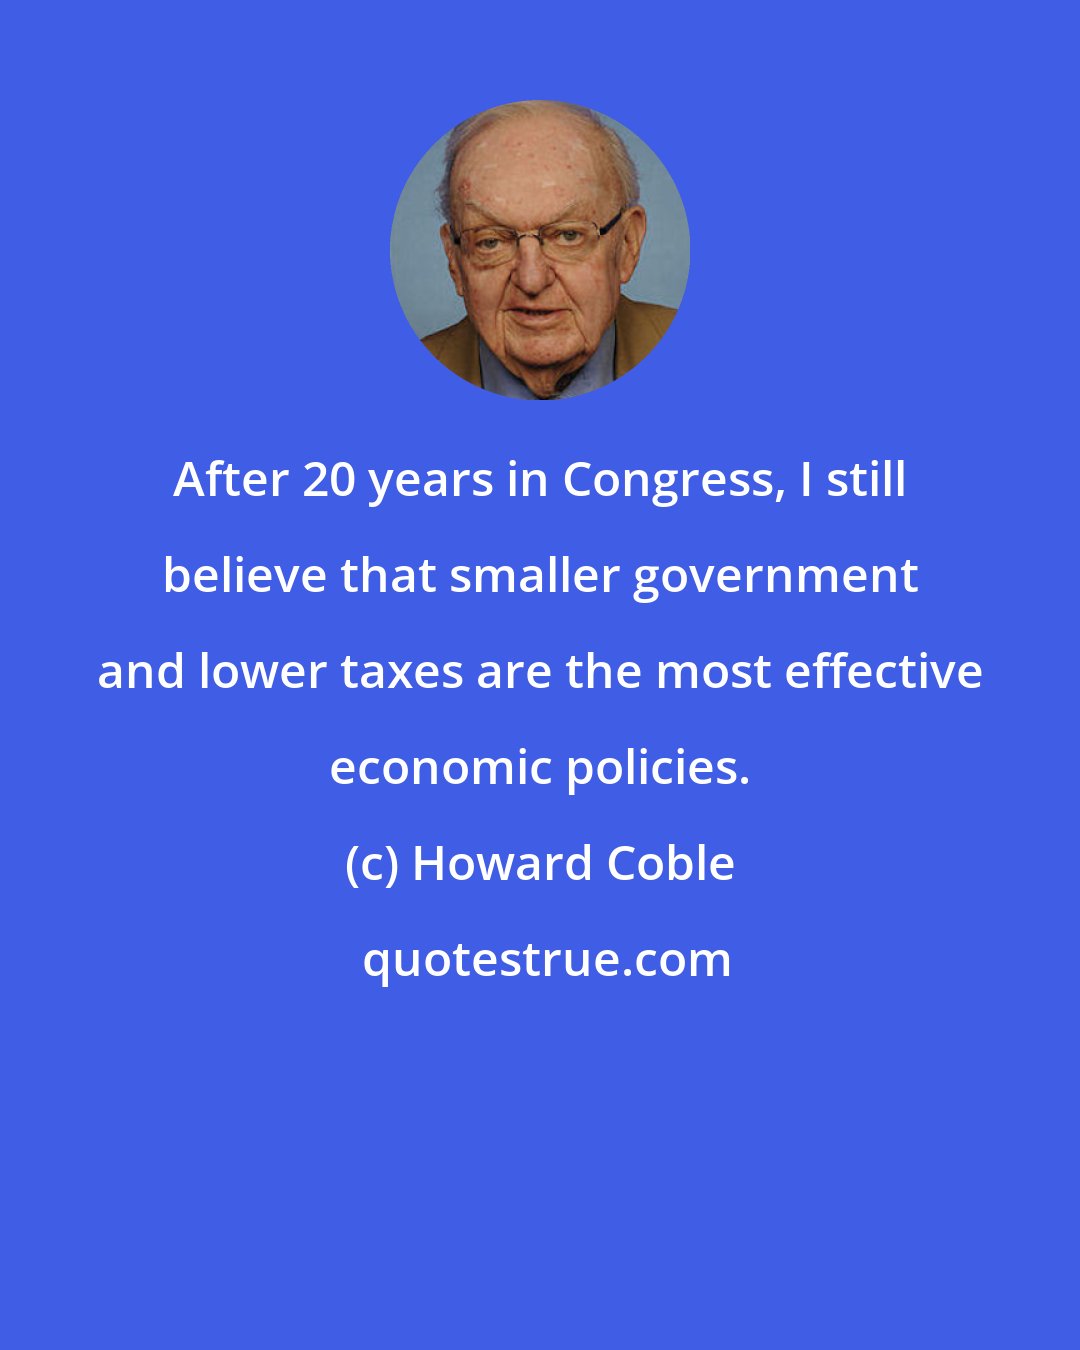 Howard Coble: After 20 years in Congress, I still believe that smaller government and lower taxes are the most effective economic policies.